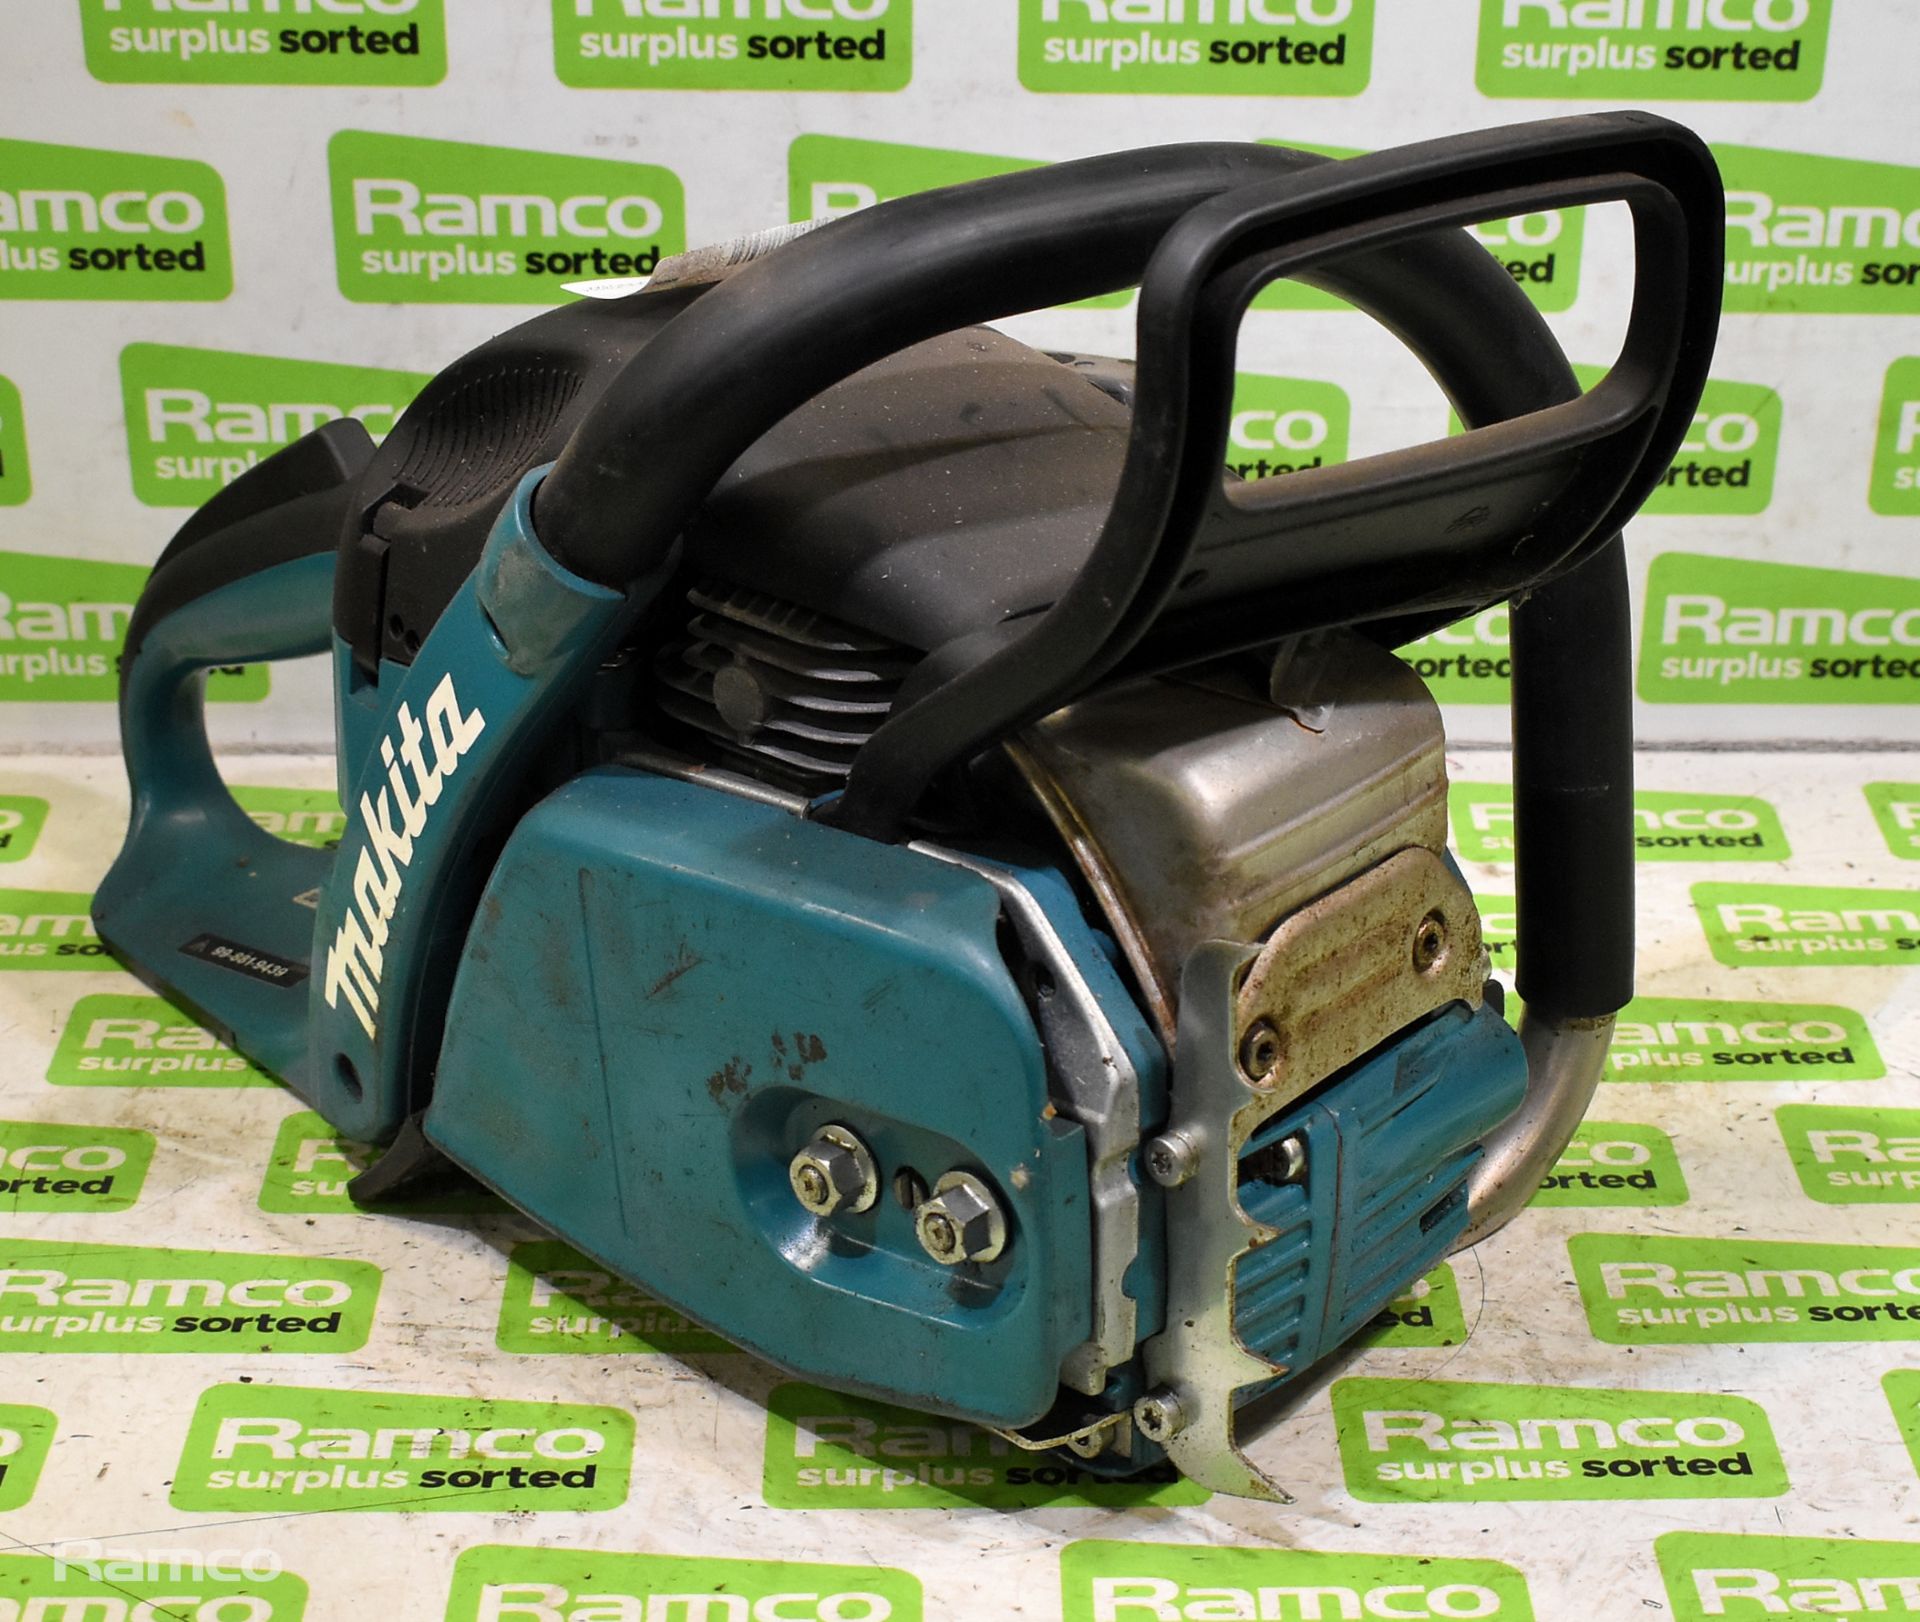 6x Makita DCS5030 50cc petrol chainsaw - BODIES ONLY - AS SPARES & REPAIRS - Image 25 of 33